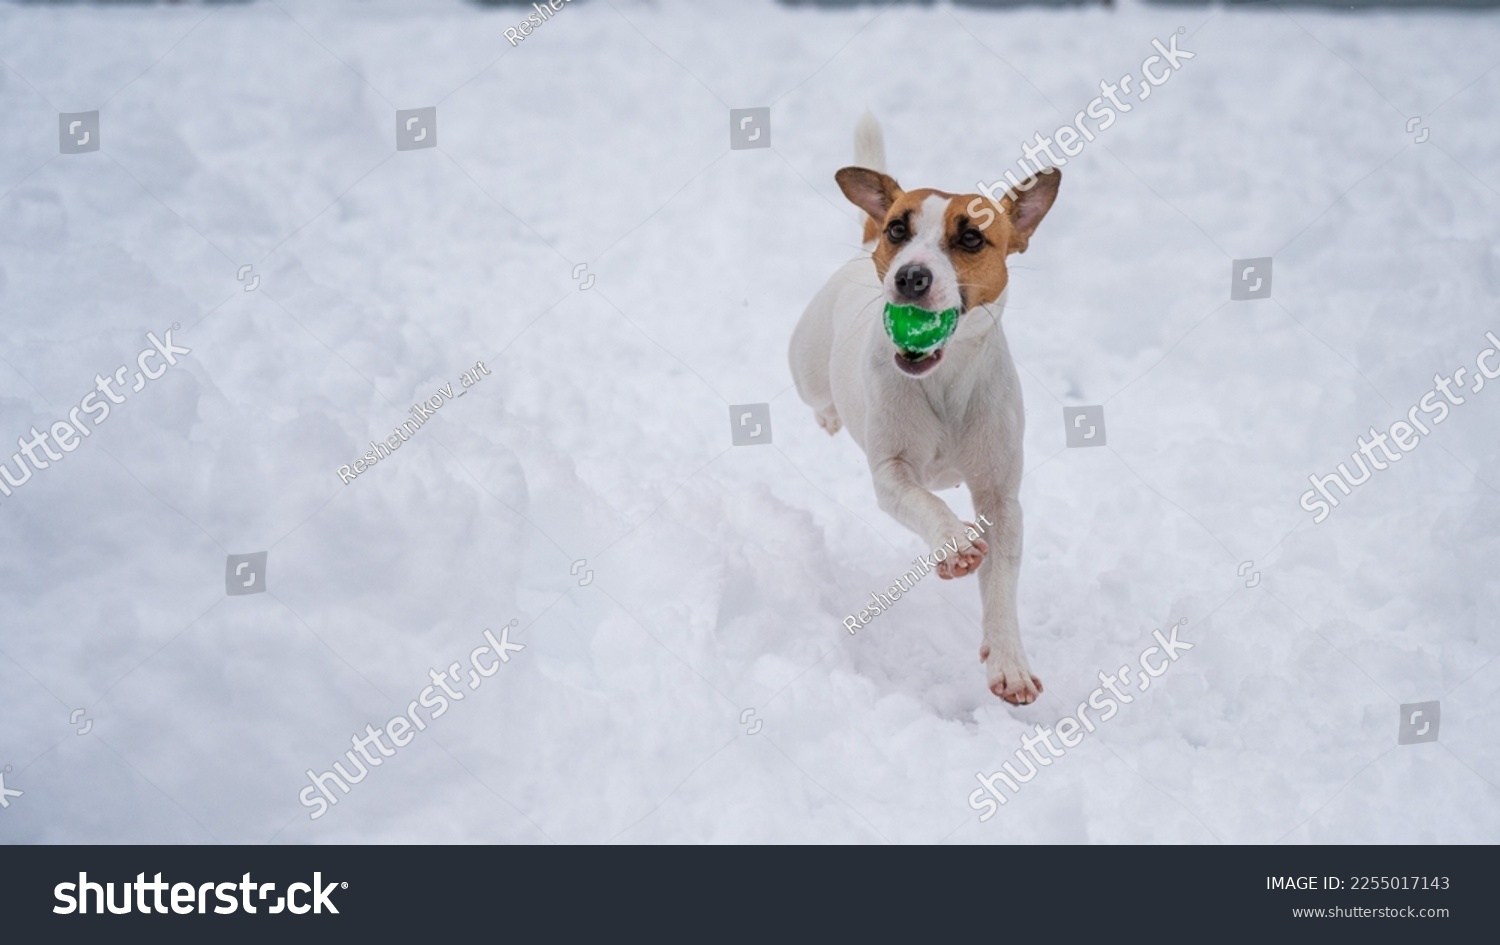 Jack Russell Terrier dog playing ball in the snow.  #2255017143